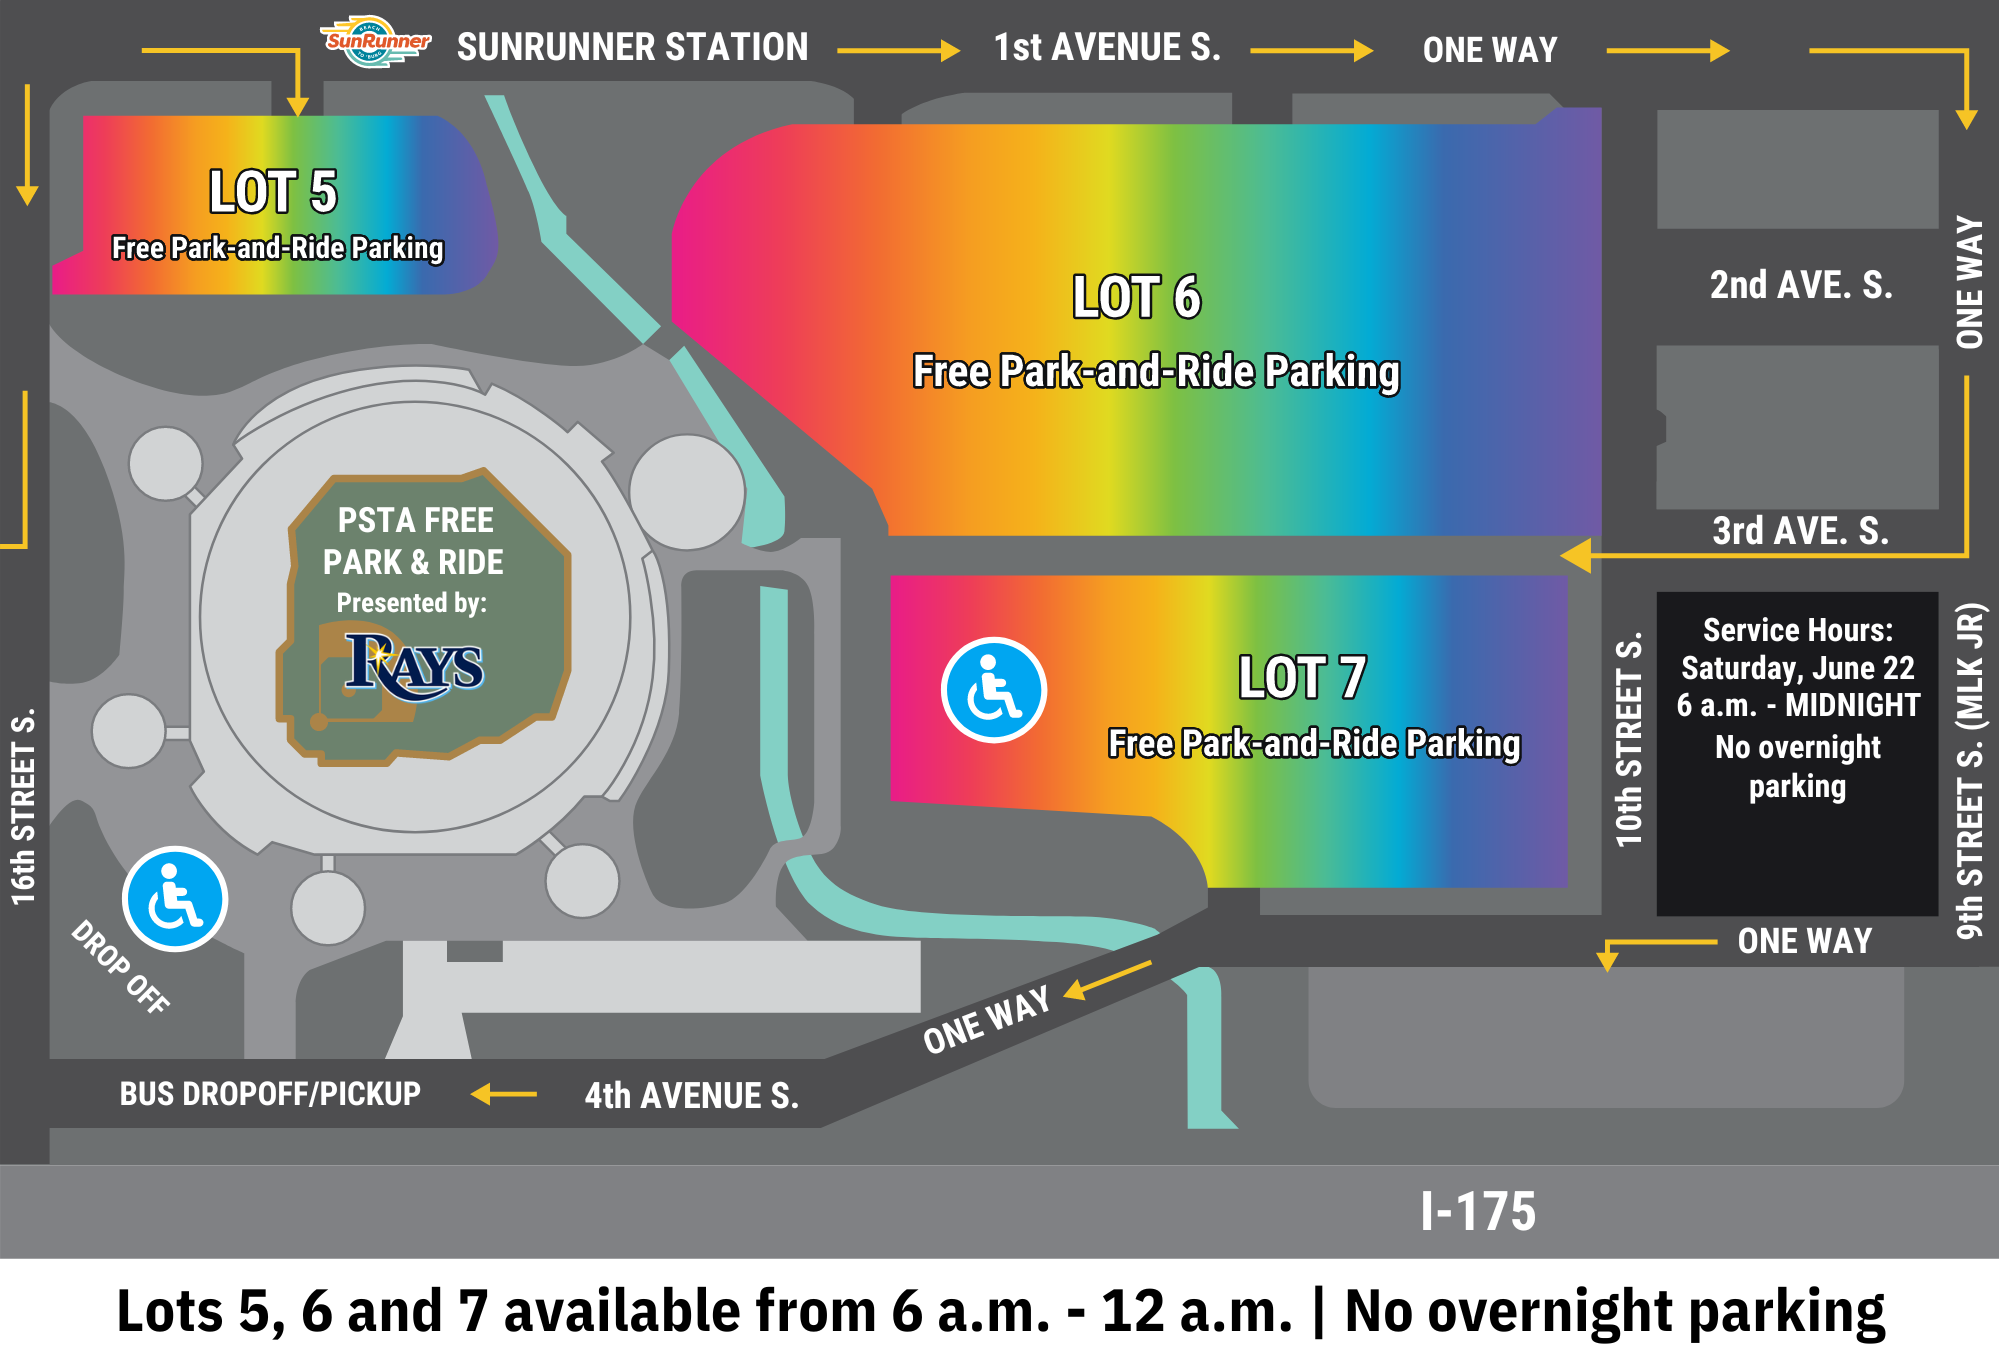 Map of Tropicana Field showing lots 5, 6, and 7 as the designated Park & Ride lots